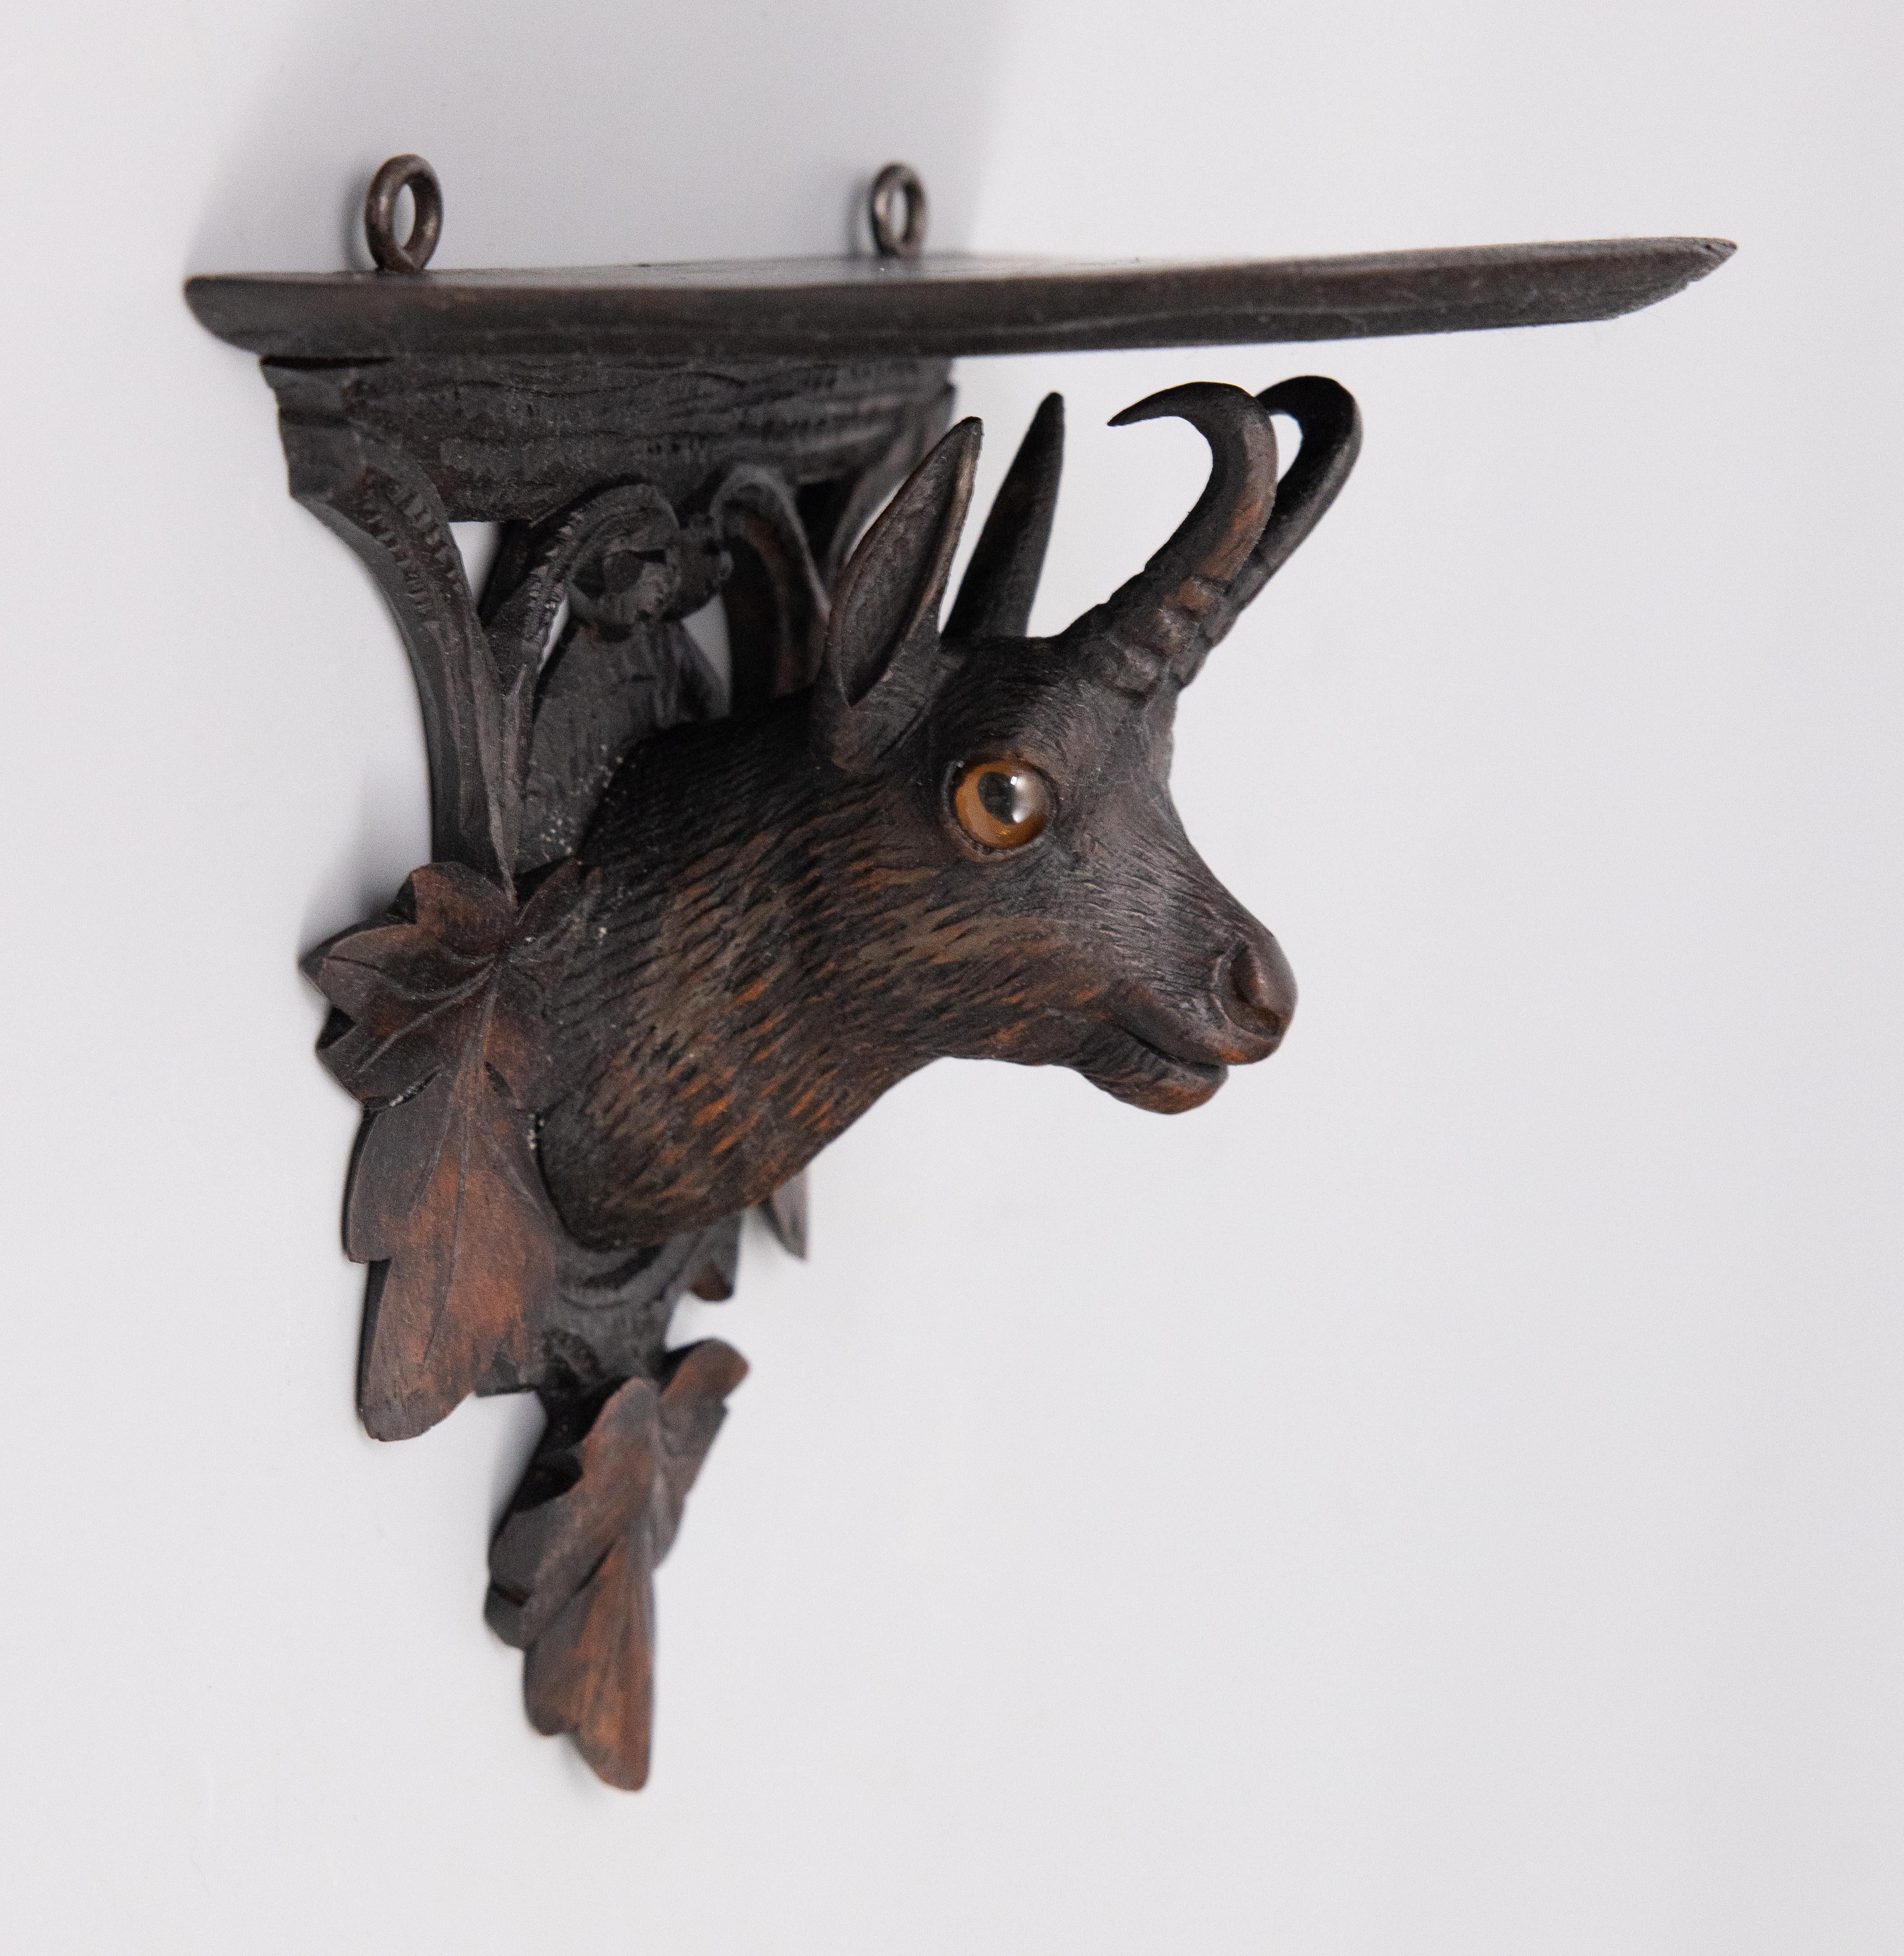 A superb antique Black Forest chamois or mountain goat wall bracket shelf hand carved in Switzerland, circa 1900. This fine bracket features a handsome chamois with glass eyes surrounded by intricately carved leaves. It's perfect for your rustic